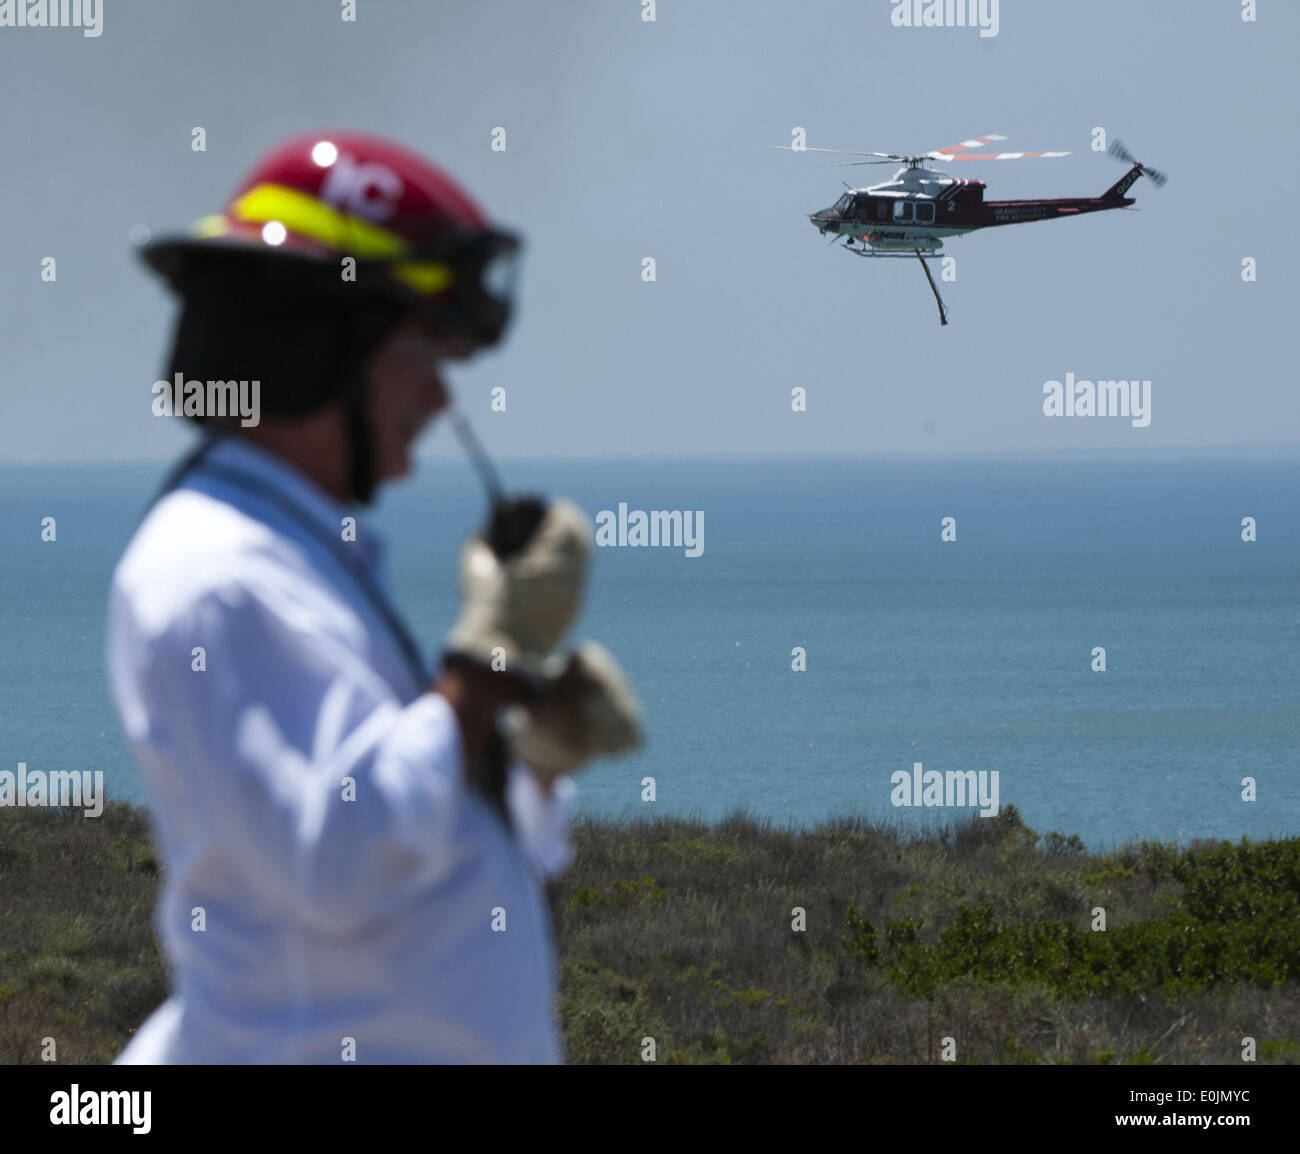 San Onofre, California, USA. 13th May, 2013. A San Onofre Nuclear Generating Station Fire Brigade Captain monitors the radio as an Orange County Fire Authority helicopter passing by on its way to drop fire on Wednesday morning. Multiple Fire agencies, including Federal, State and County, responded to a wildfire on at the San Clemente Check Point that began when a truck on the northbound I-5 Freeway caught fire and passed to nearby vegetation on Wednesday morning. The Pendleton West Fire, had north and south bound trafficstopped, along with Amtrak Passenger Train traffic, as firefighters foug Stock Photo